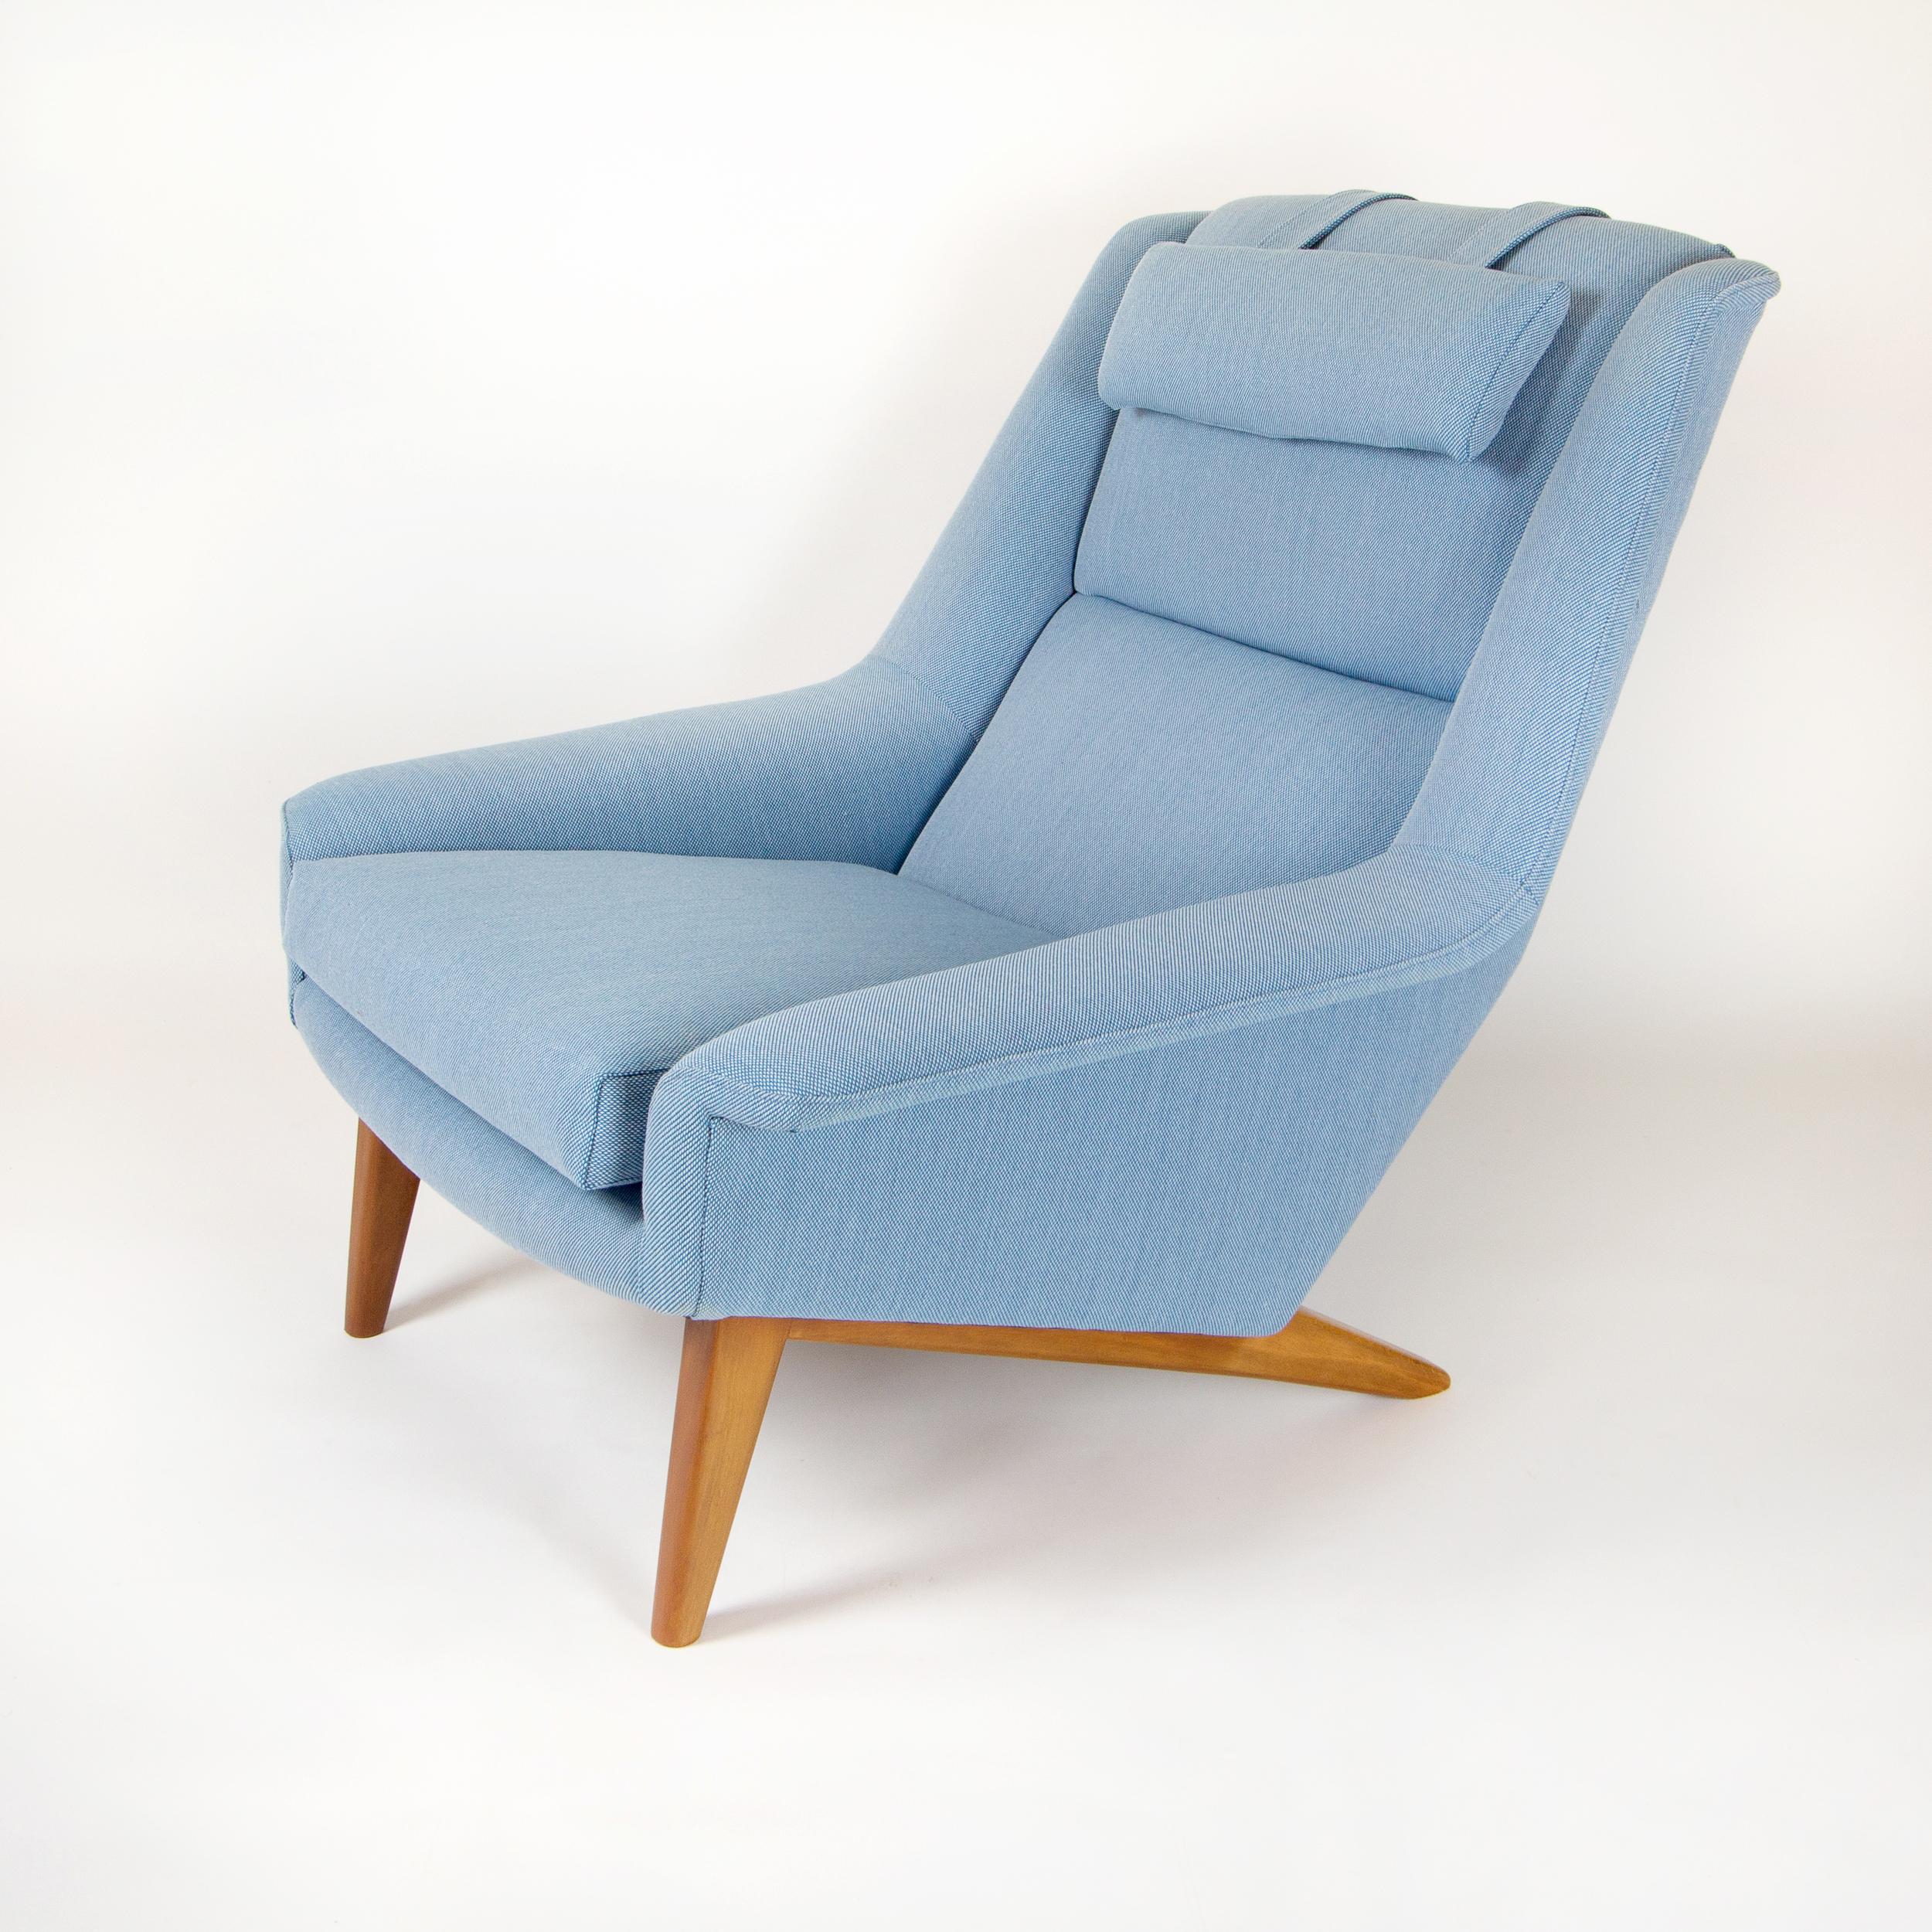 This big, comfortable Model 4410 Sonet Armchair by Swedish designer Folke Ohlsson and Danish manufacturer Fritz Hansen combines the best of these two Scandinavian Modern powerhouses. The chair has been professionally reupholstered in Danish Kvadrat